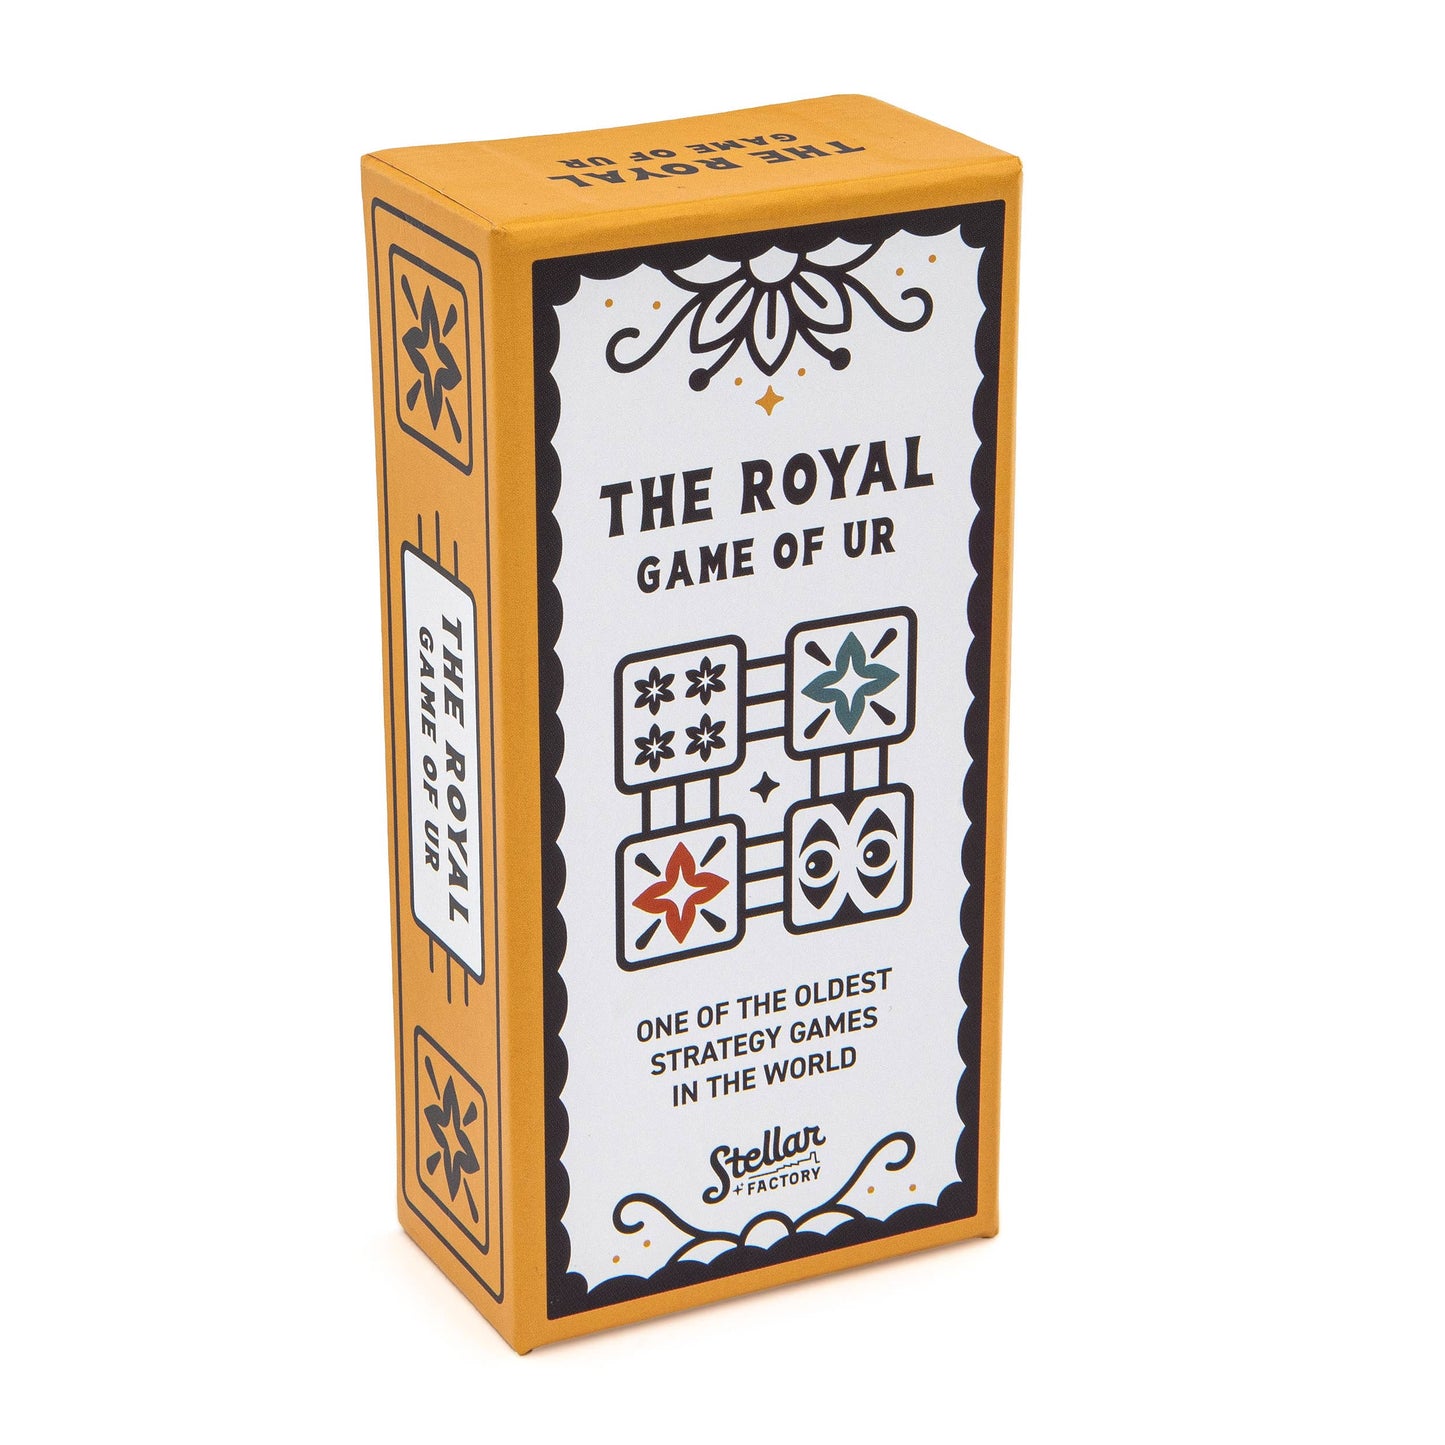 The Royal Game of UR - One of the Oldest Games in the World